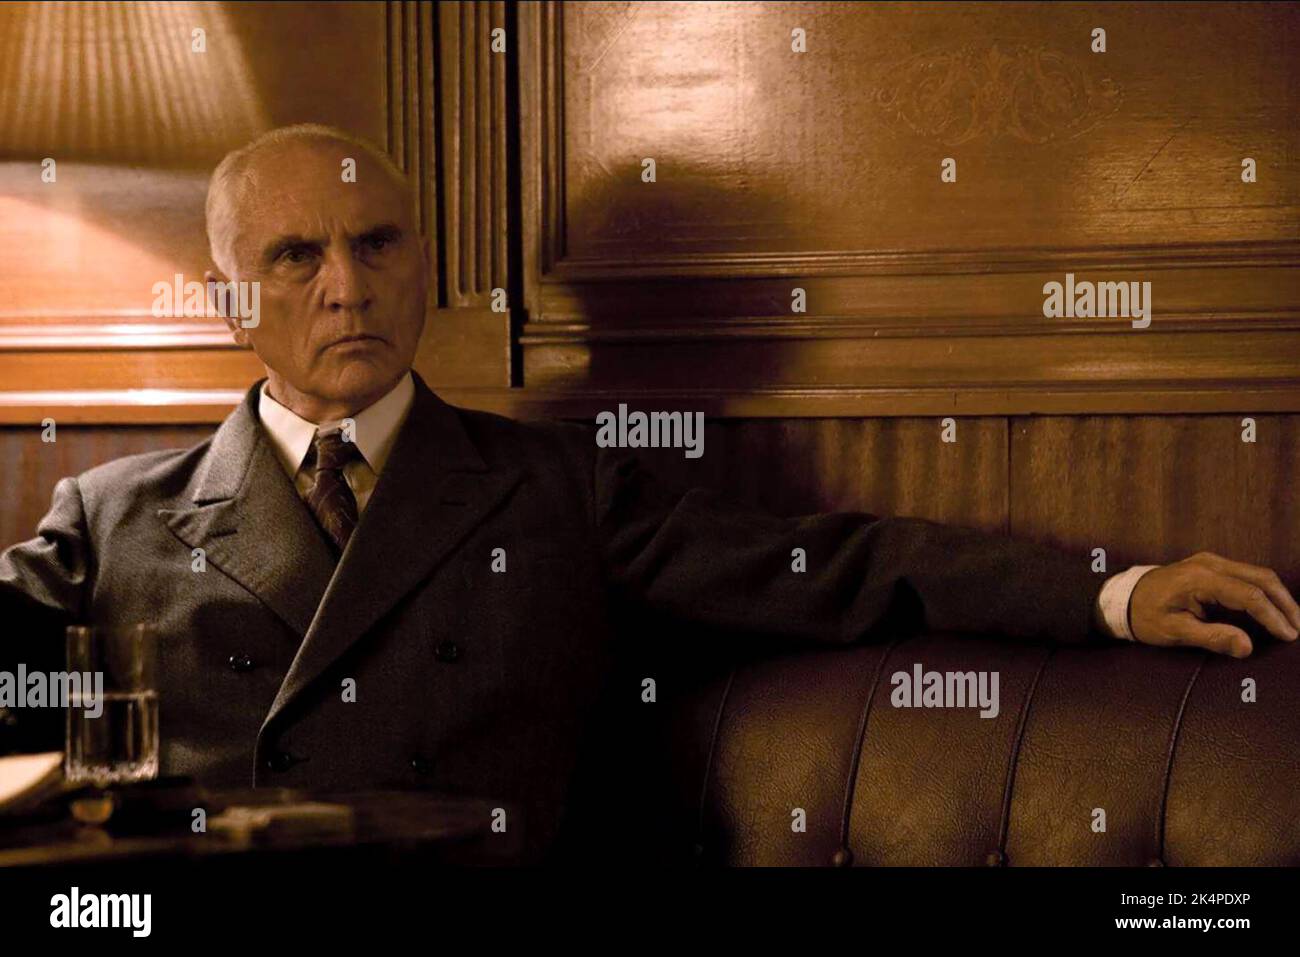 TERENCE STAMP, VALKYRIE, 2008 Stock Photo